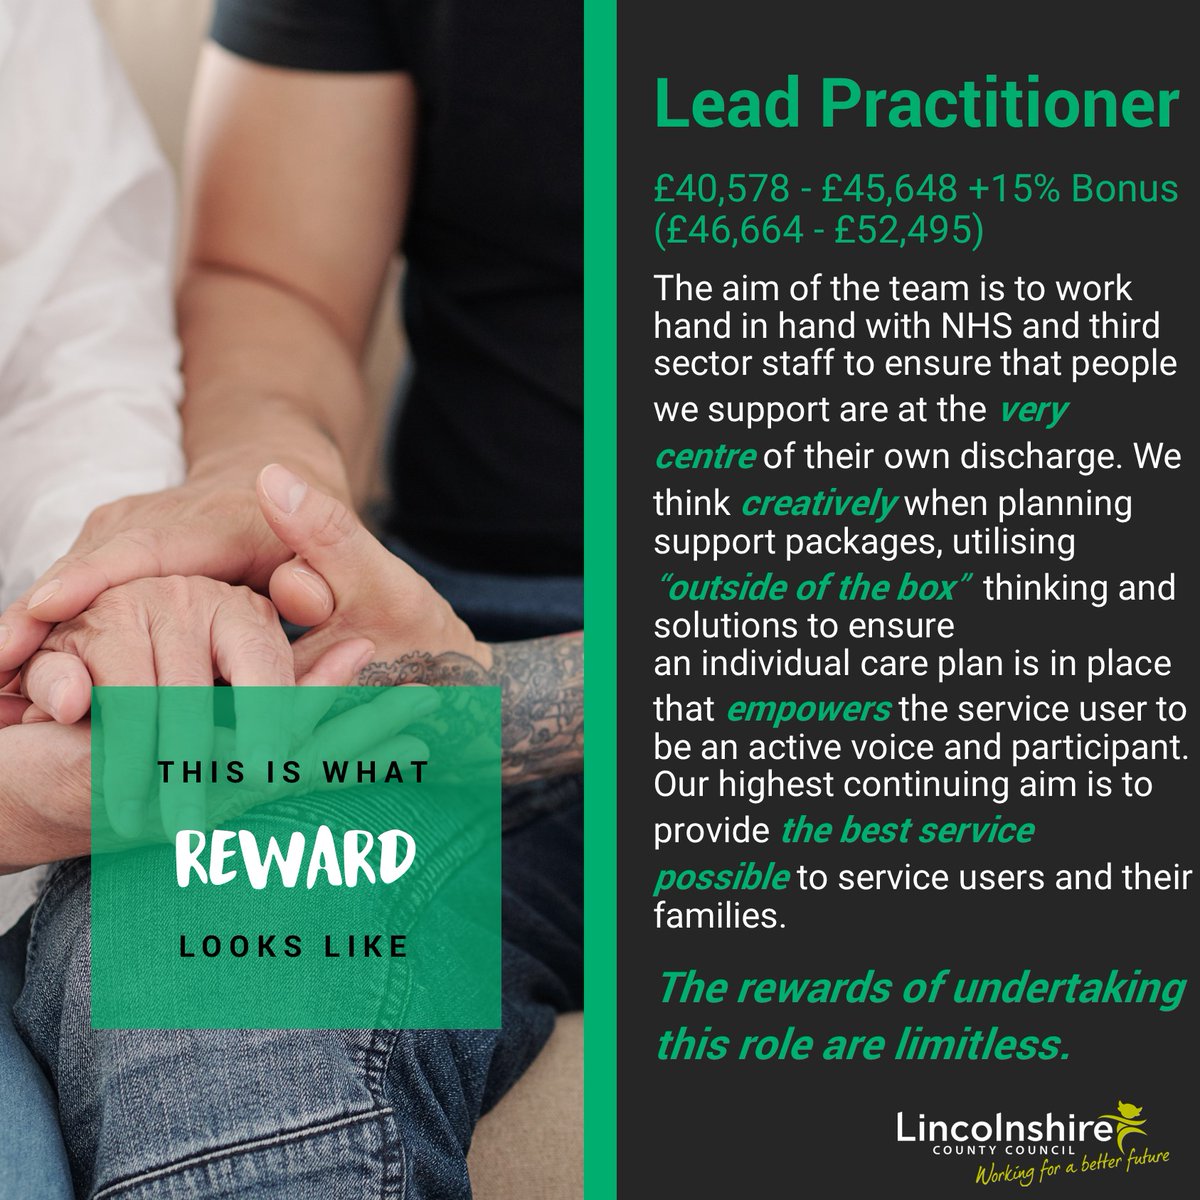 ❗JOB VACANCY❗ Lead Practitioner £40,578 - £45,648 +15% Bonus (£46,664 - £52,495) 📌Boston This position closes Sunday 24th July at midnight. For more information, job descriptions and to apply, click here: tinyurl.com/bddyez8d #careers #applynow #vacancy #jobsinlincolnshire